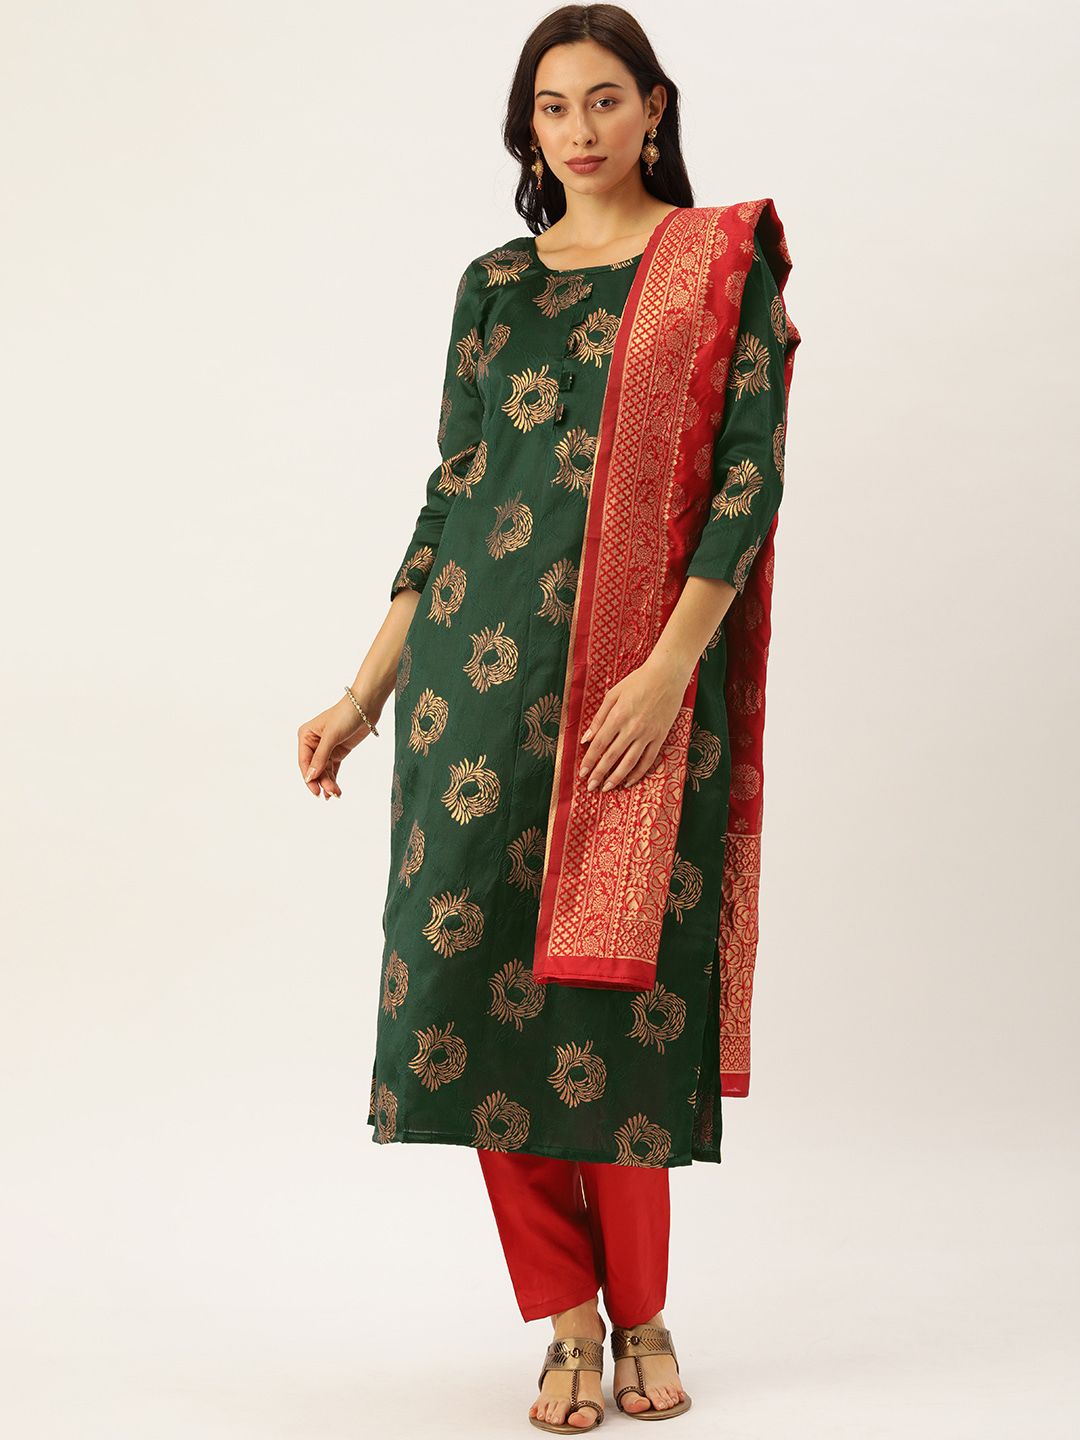 Kvsfab Green & Red Silk Crepe Unstitched Dress Material Price in India